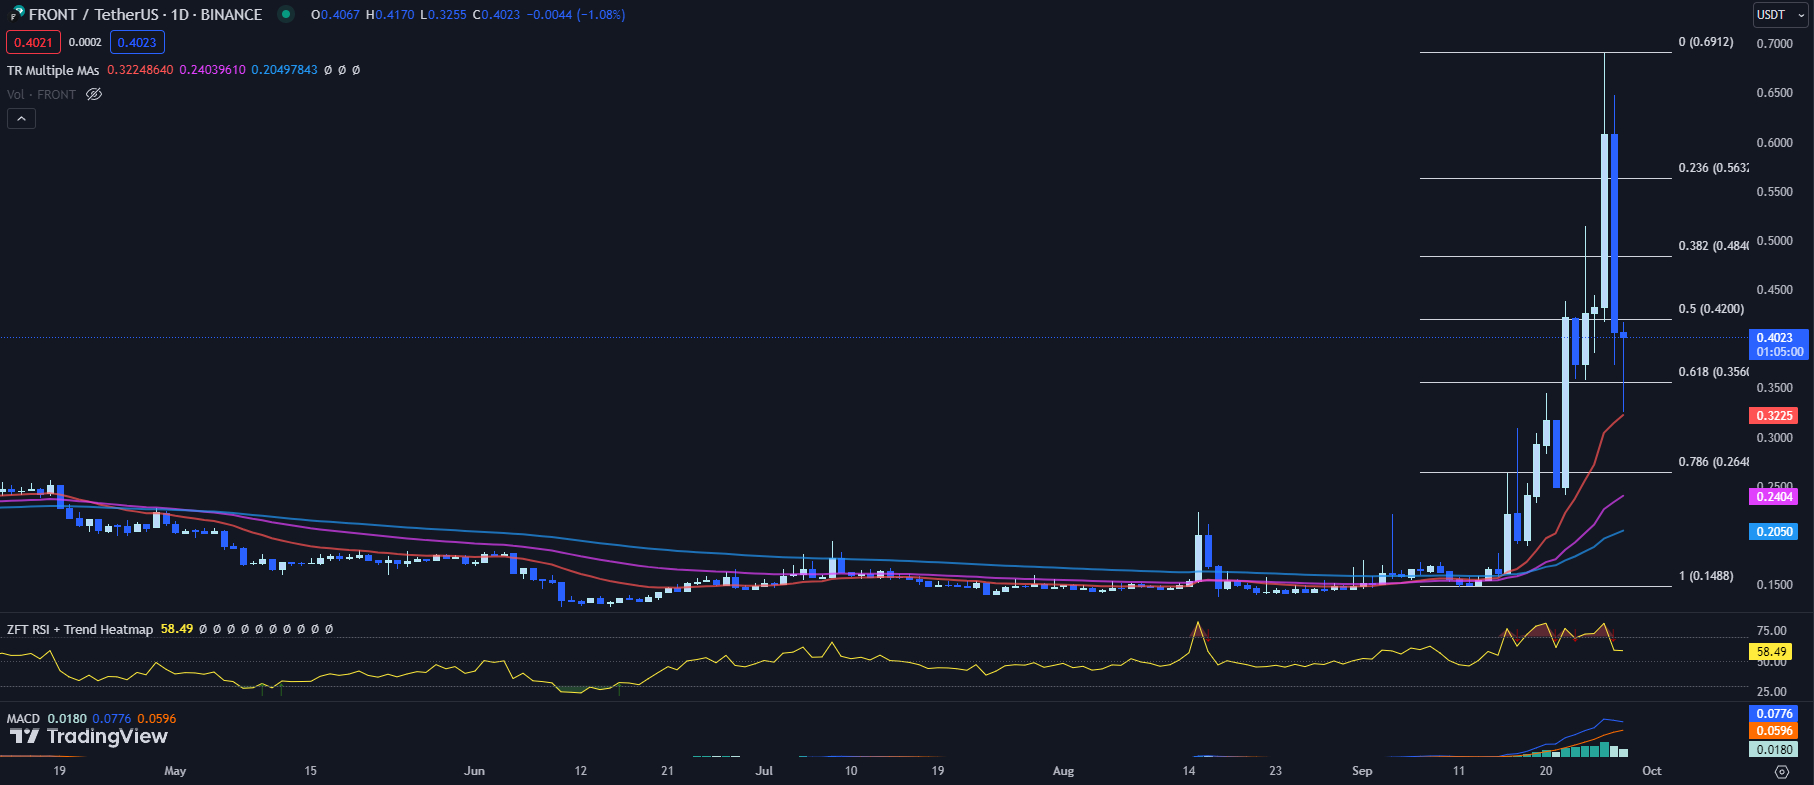 TradingView chart for the Front Price 09-28-23